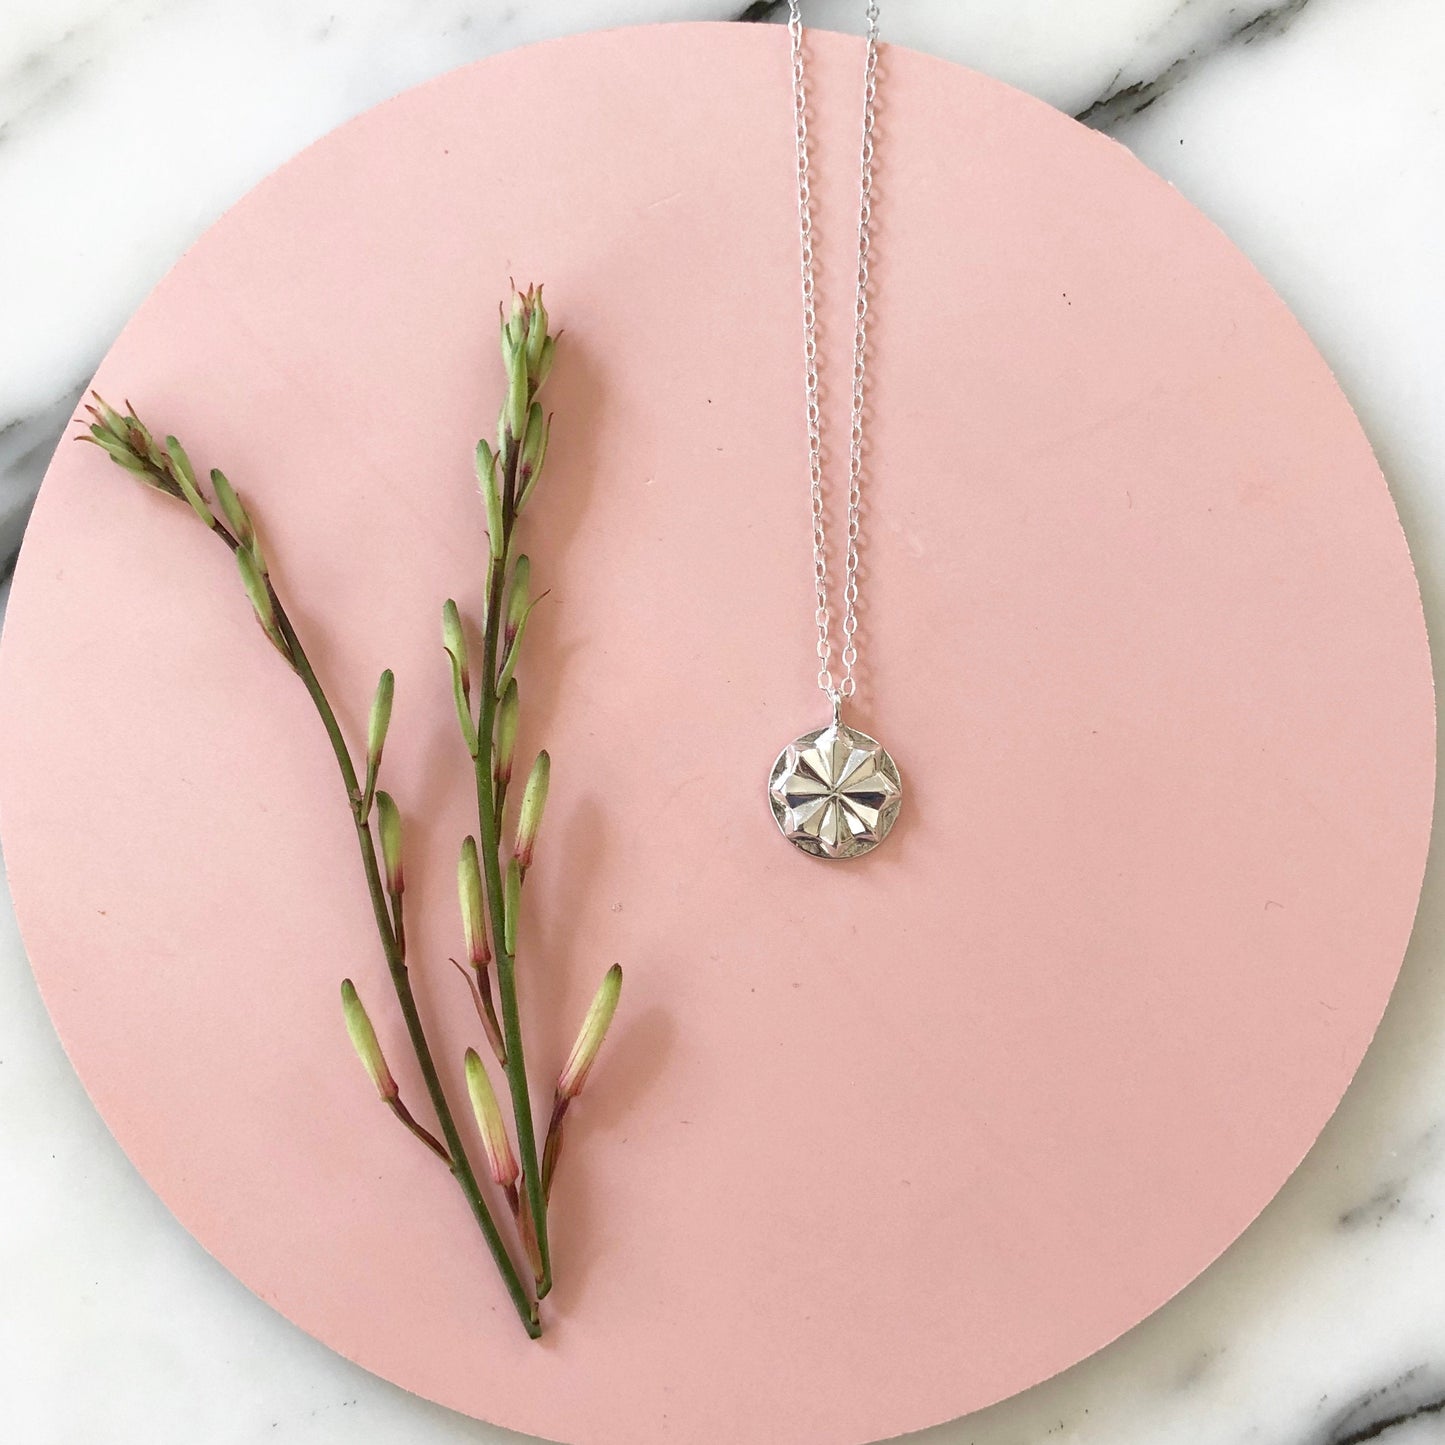 Silver circular medallion necklace on a sterling silver chain with pink circular background with greenery